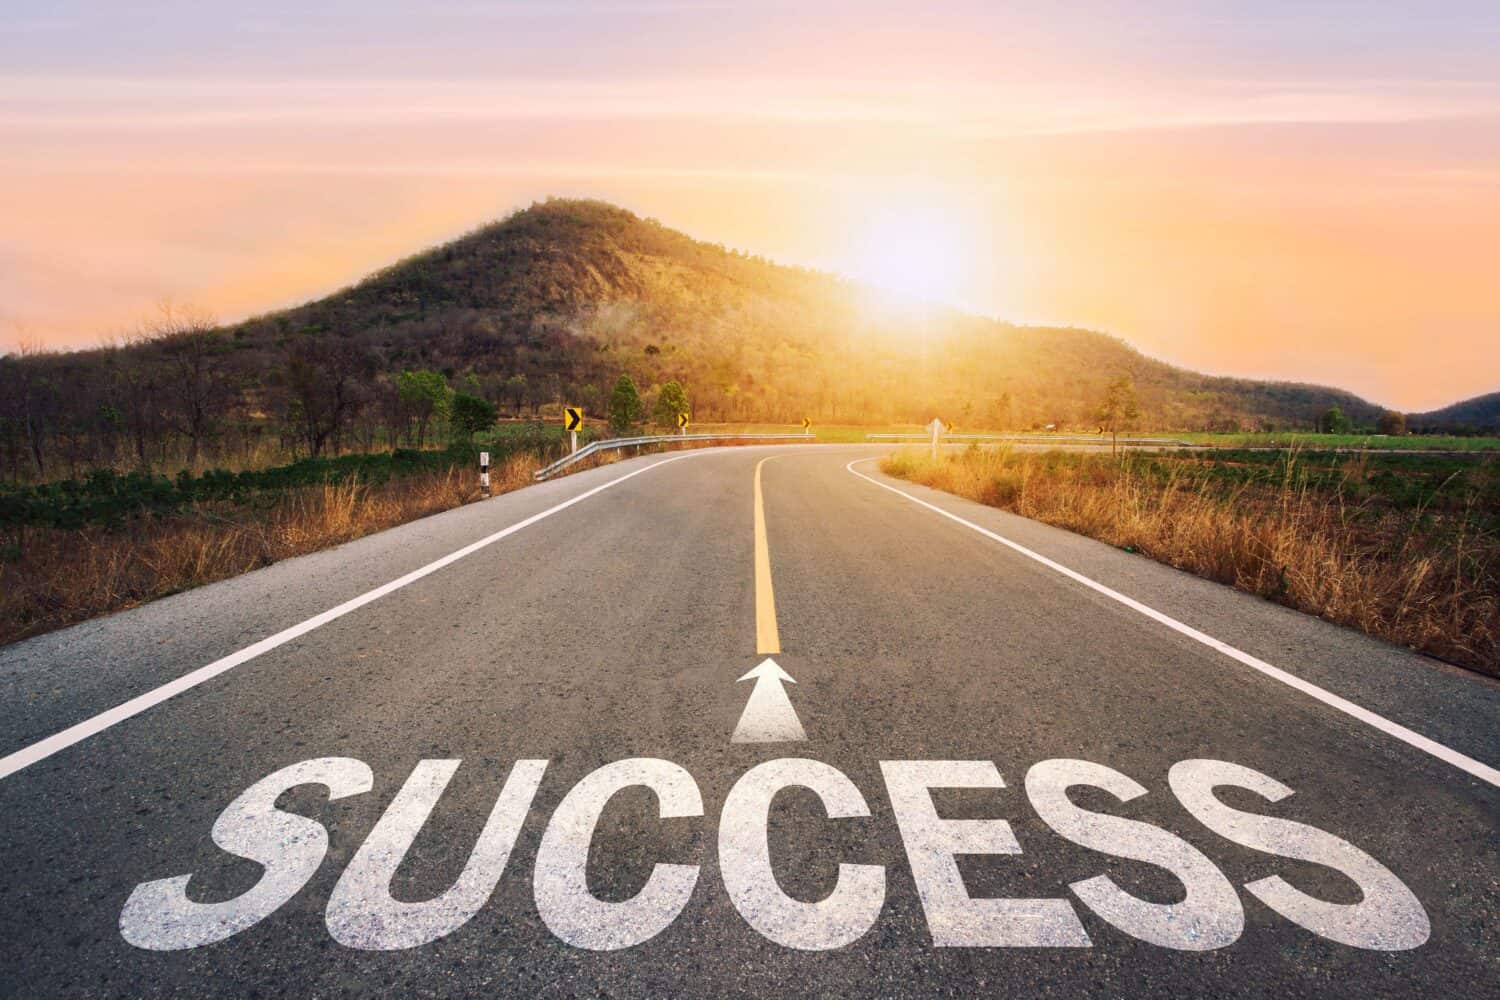 Success written on asphalt road in sunset concept of goals and challenges or career path success business opportunity and change.